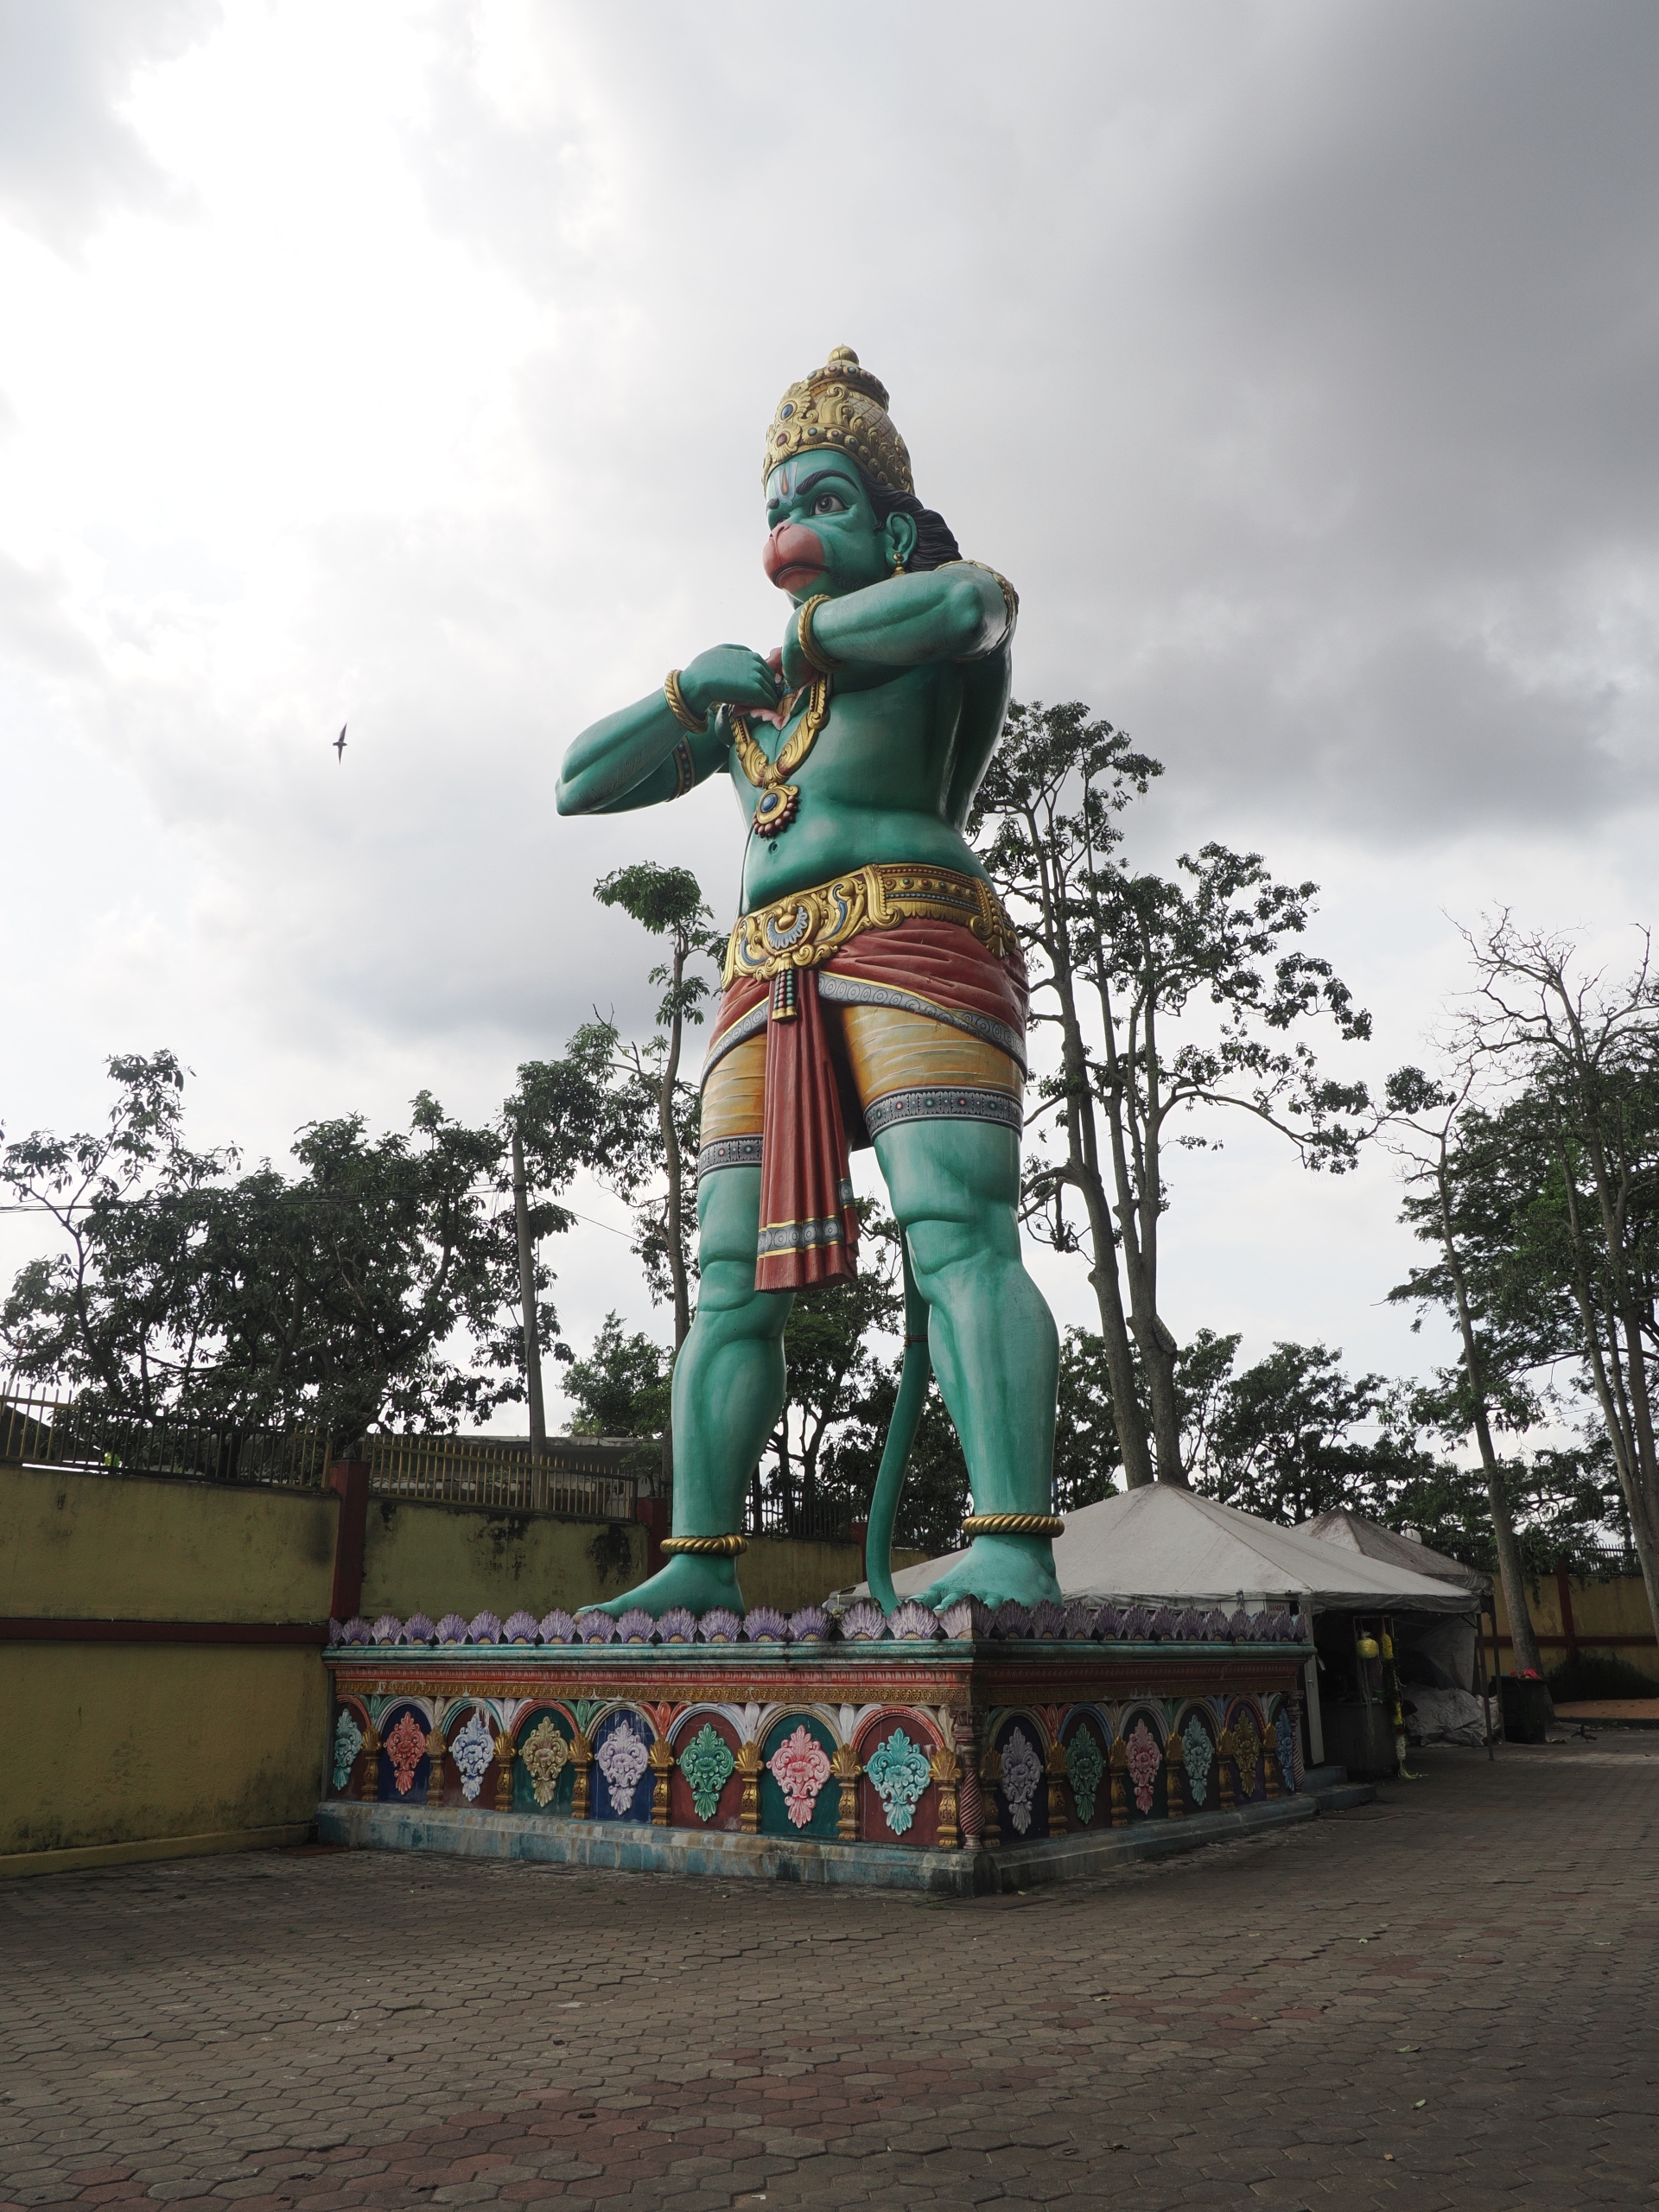 The nearby Ramayana Cave, with its statue of Lord Hanuman <em>isn't</em> the Batu Caves.